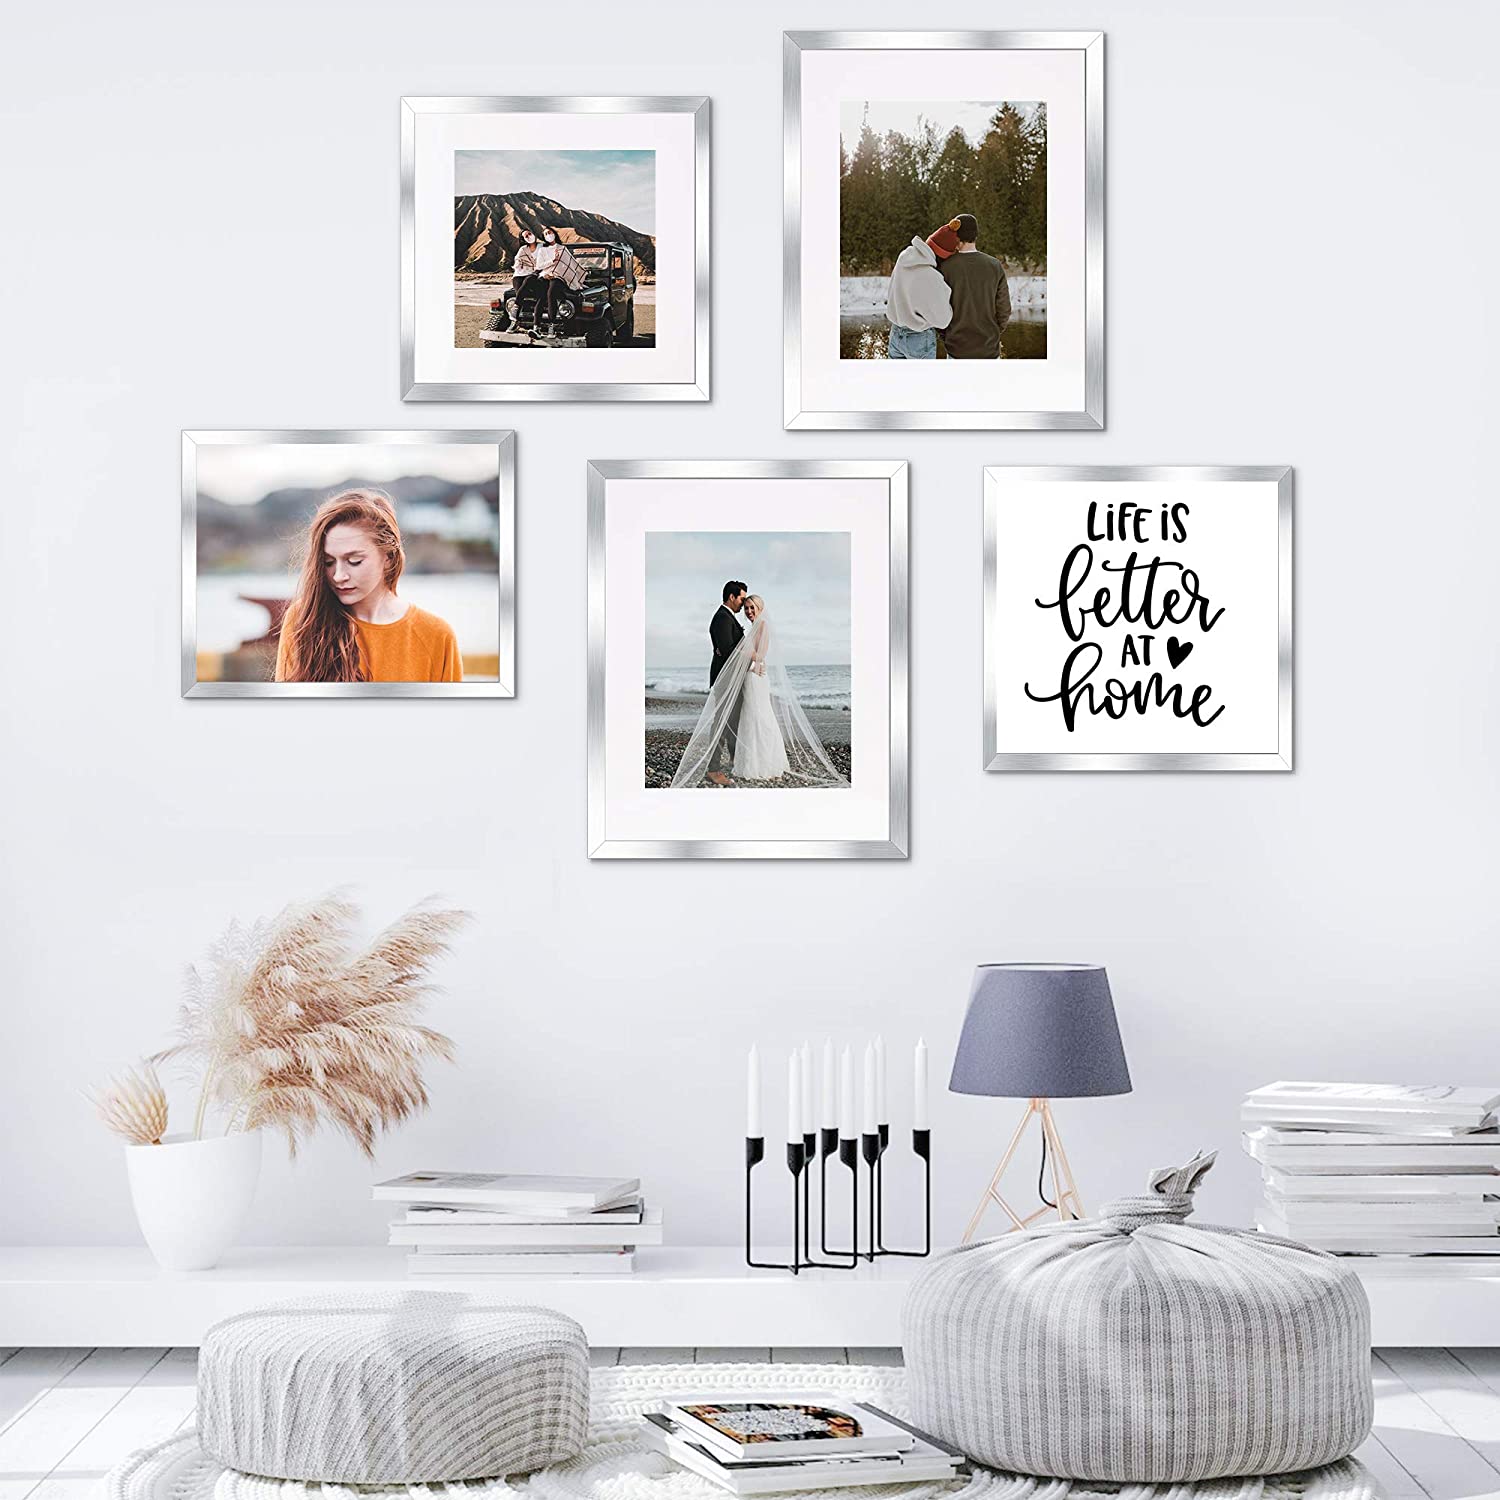 upsimples 4x6 Picture Frame Set of 10